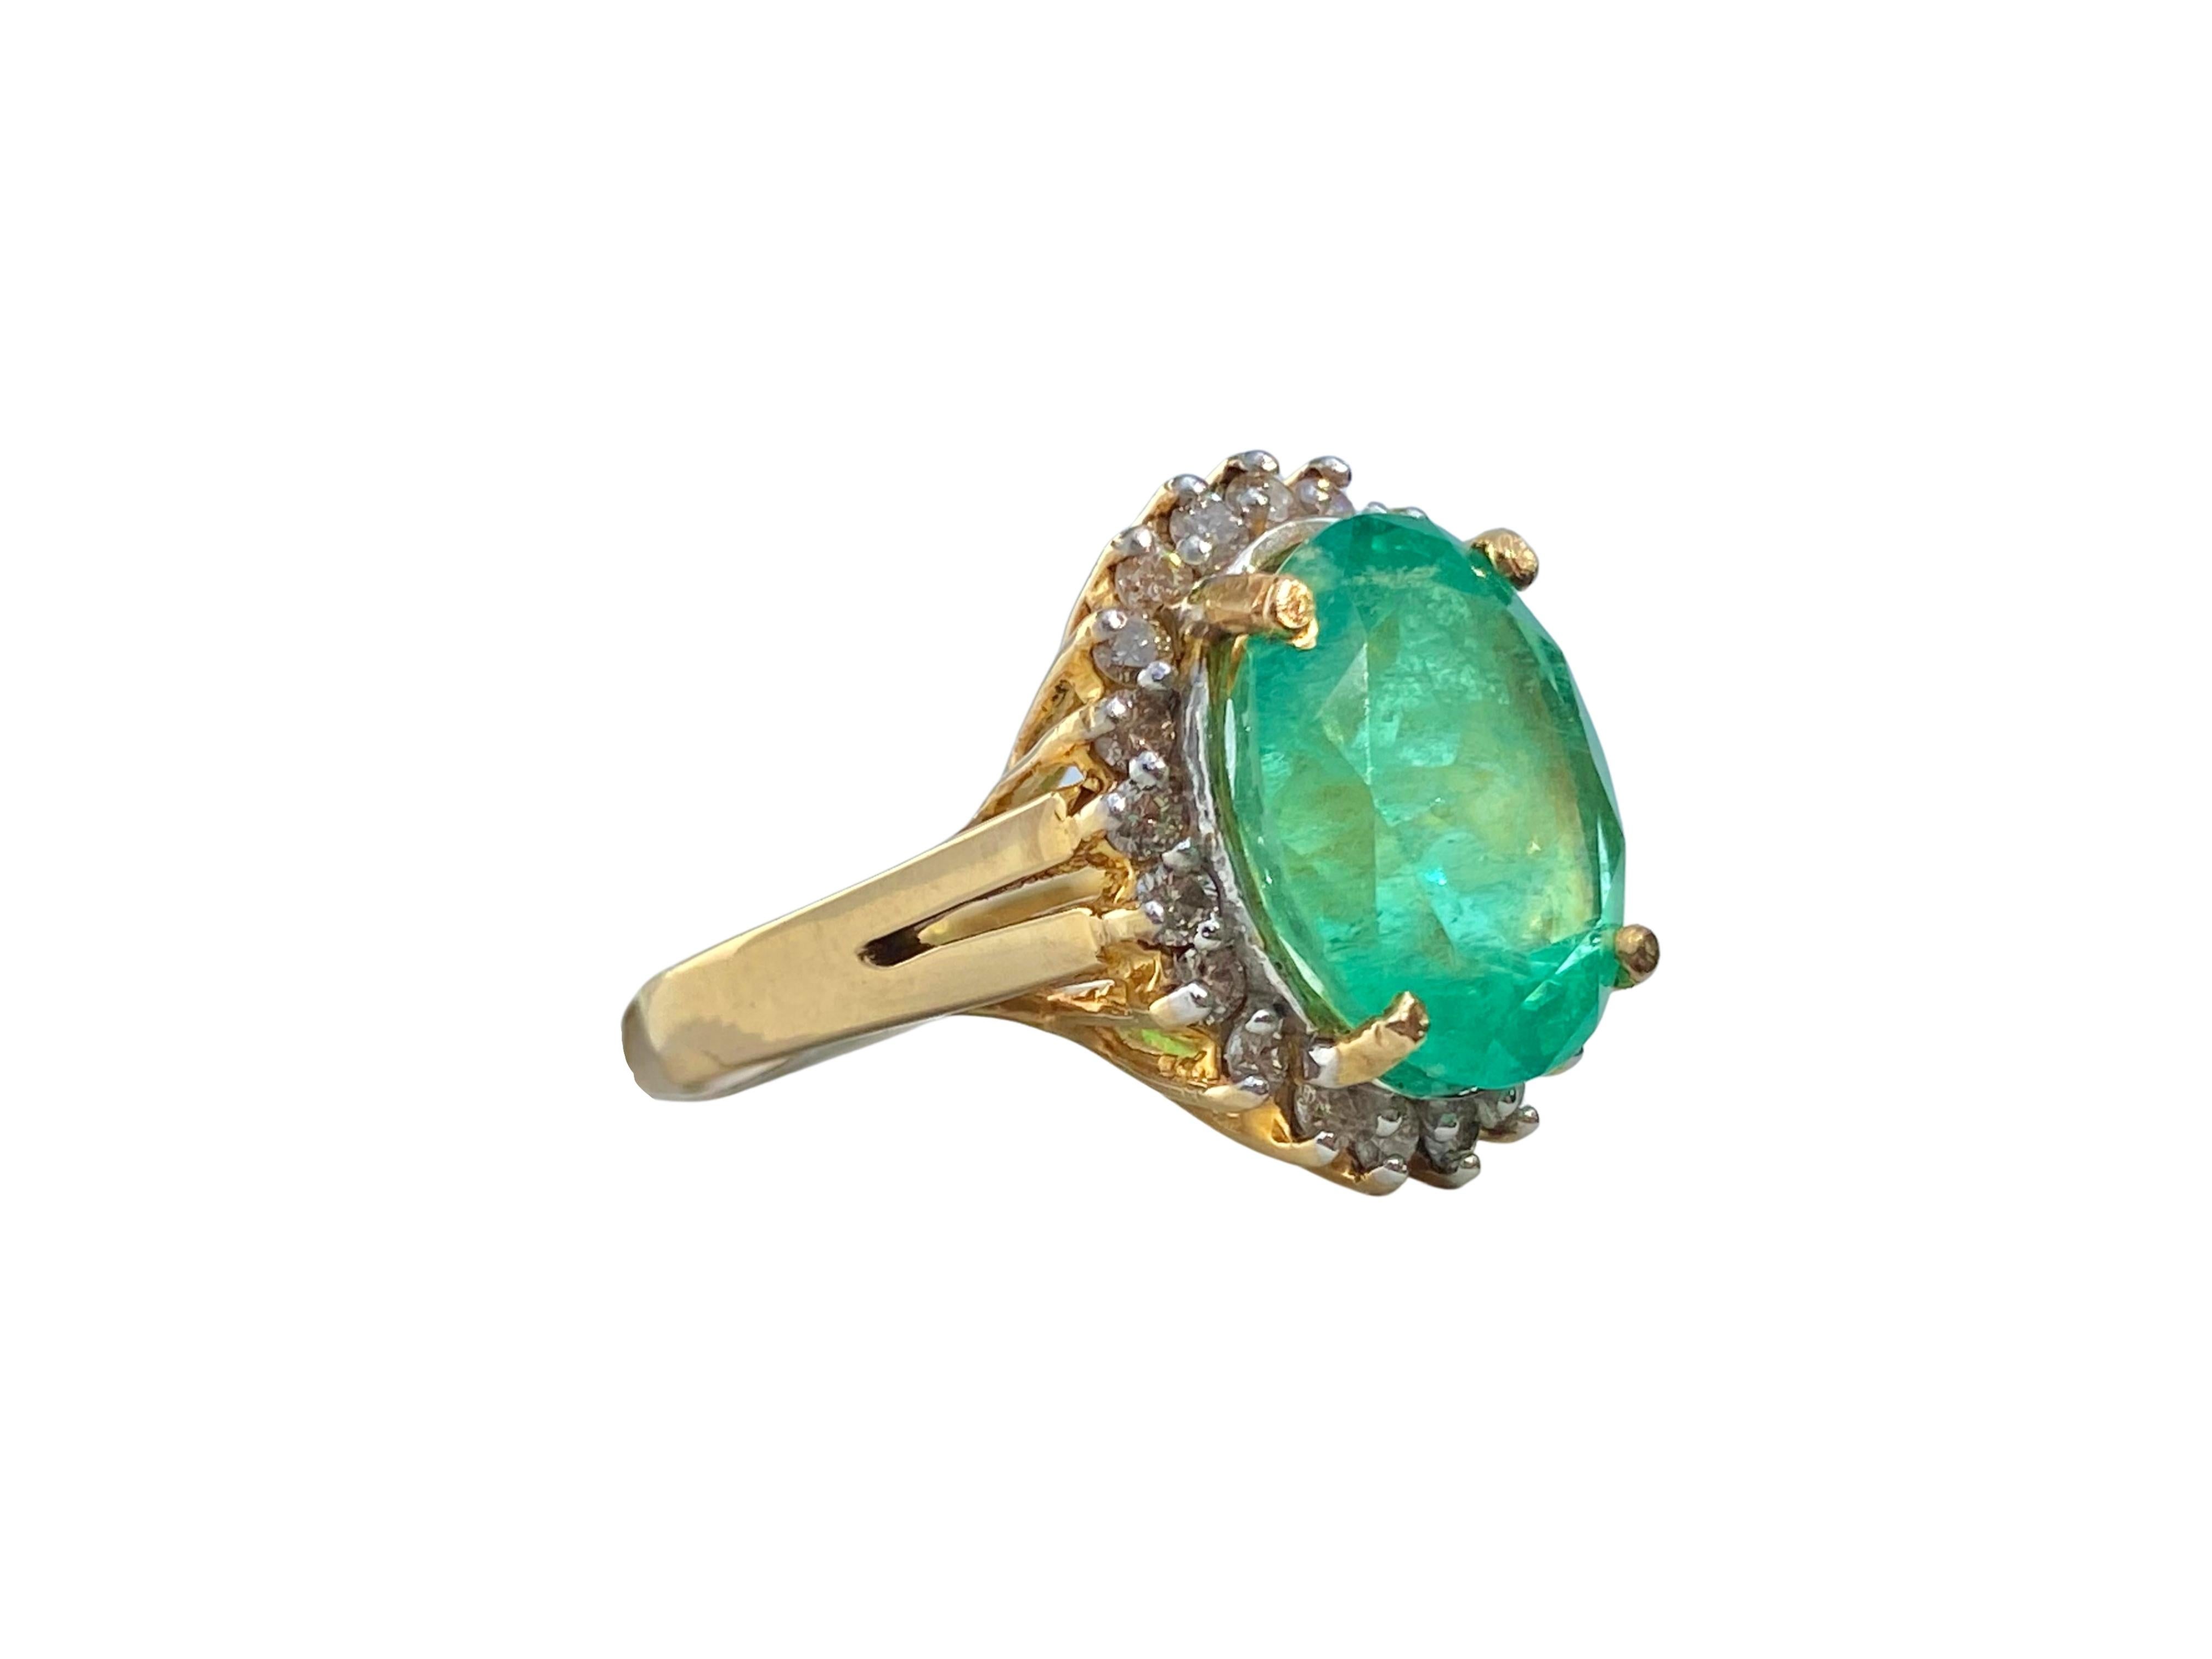 Centering a 6.88 Carat Oval-Cut Colombian Emerald, framed by 1.65 Carats of Round-Brilliant Diamonds, and set in 14K Yellow Gold. 

Details:
✔ Stone: Emerald
✔ Center-Stone Weight: 6.88 carats
✔ Stone Cut: Oval
✔ Stone Color: Vivid Green
✔ Stone